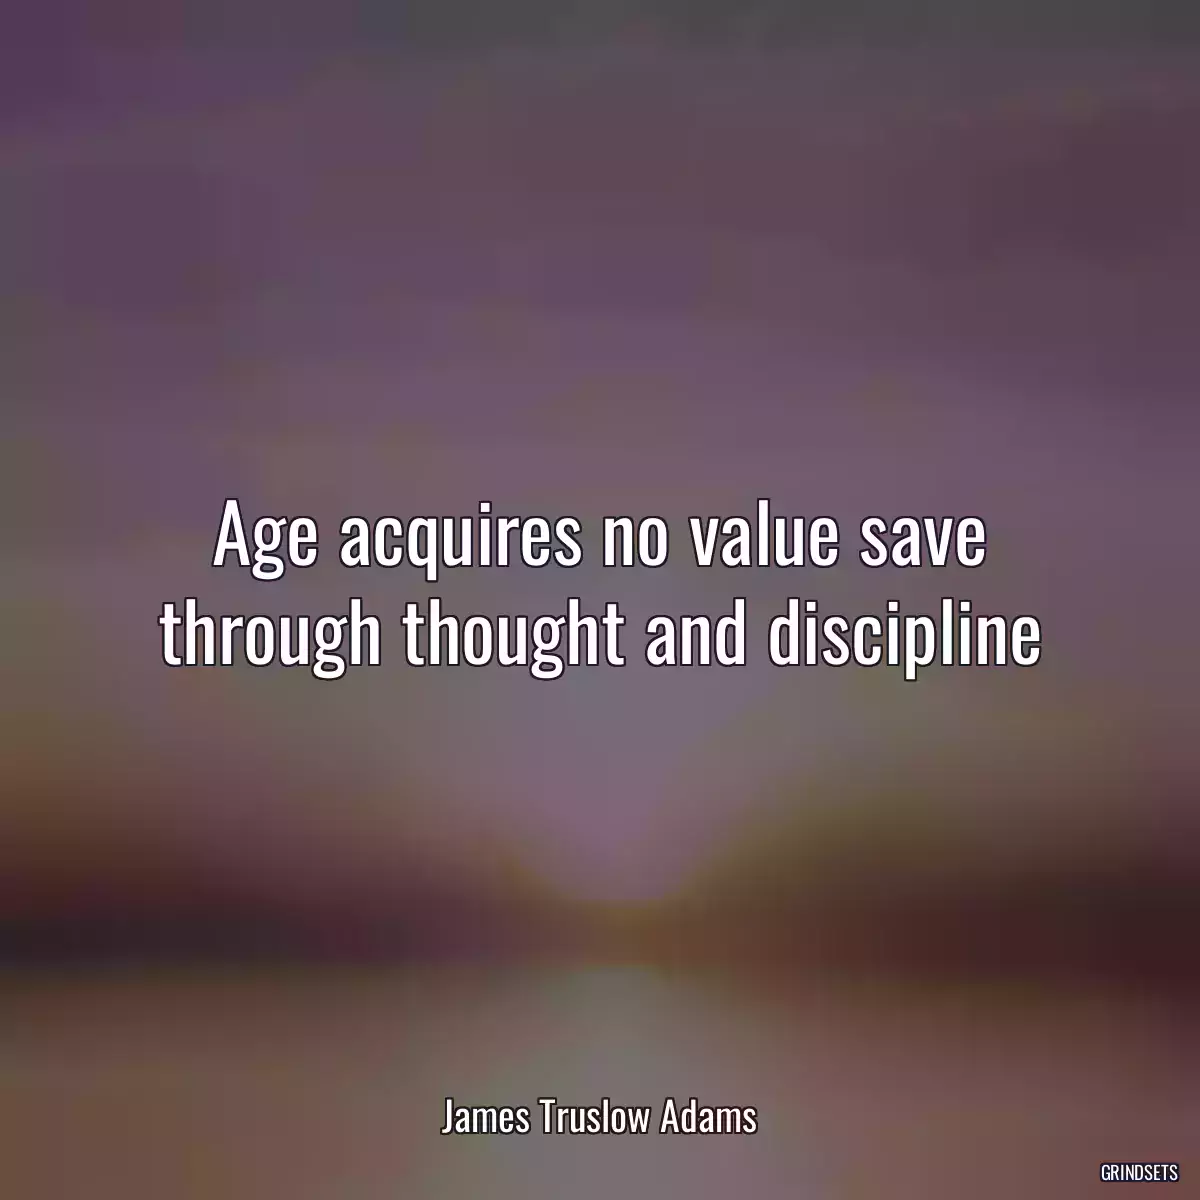 Age acquires no value save through thought and discipline